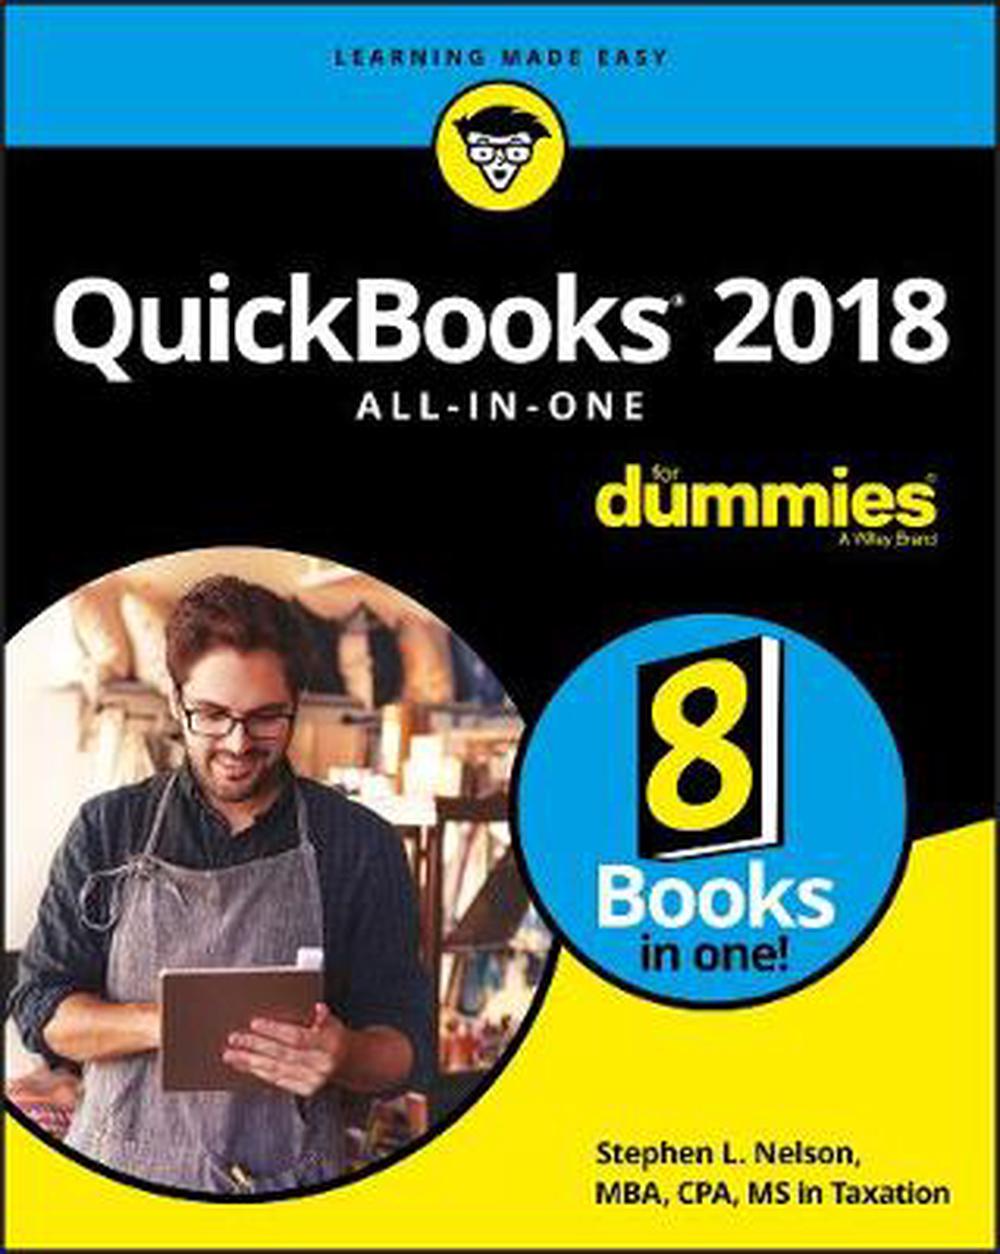 66 Top Best Writers Aio Book 